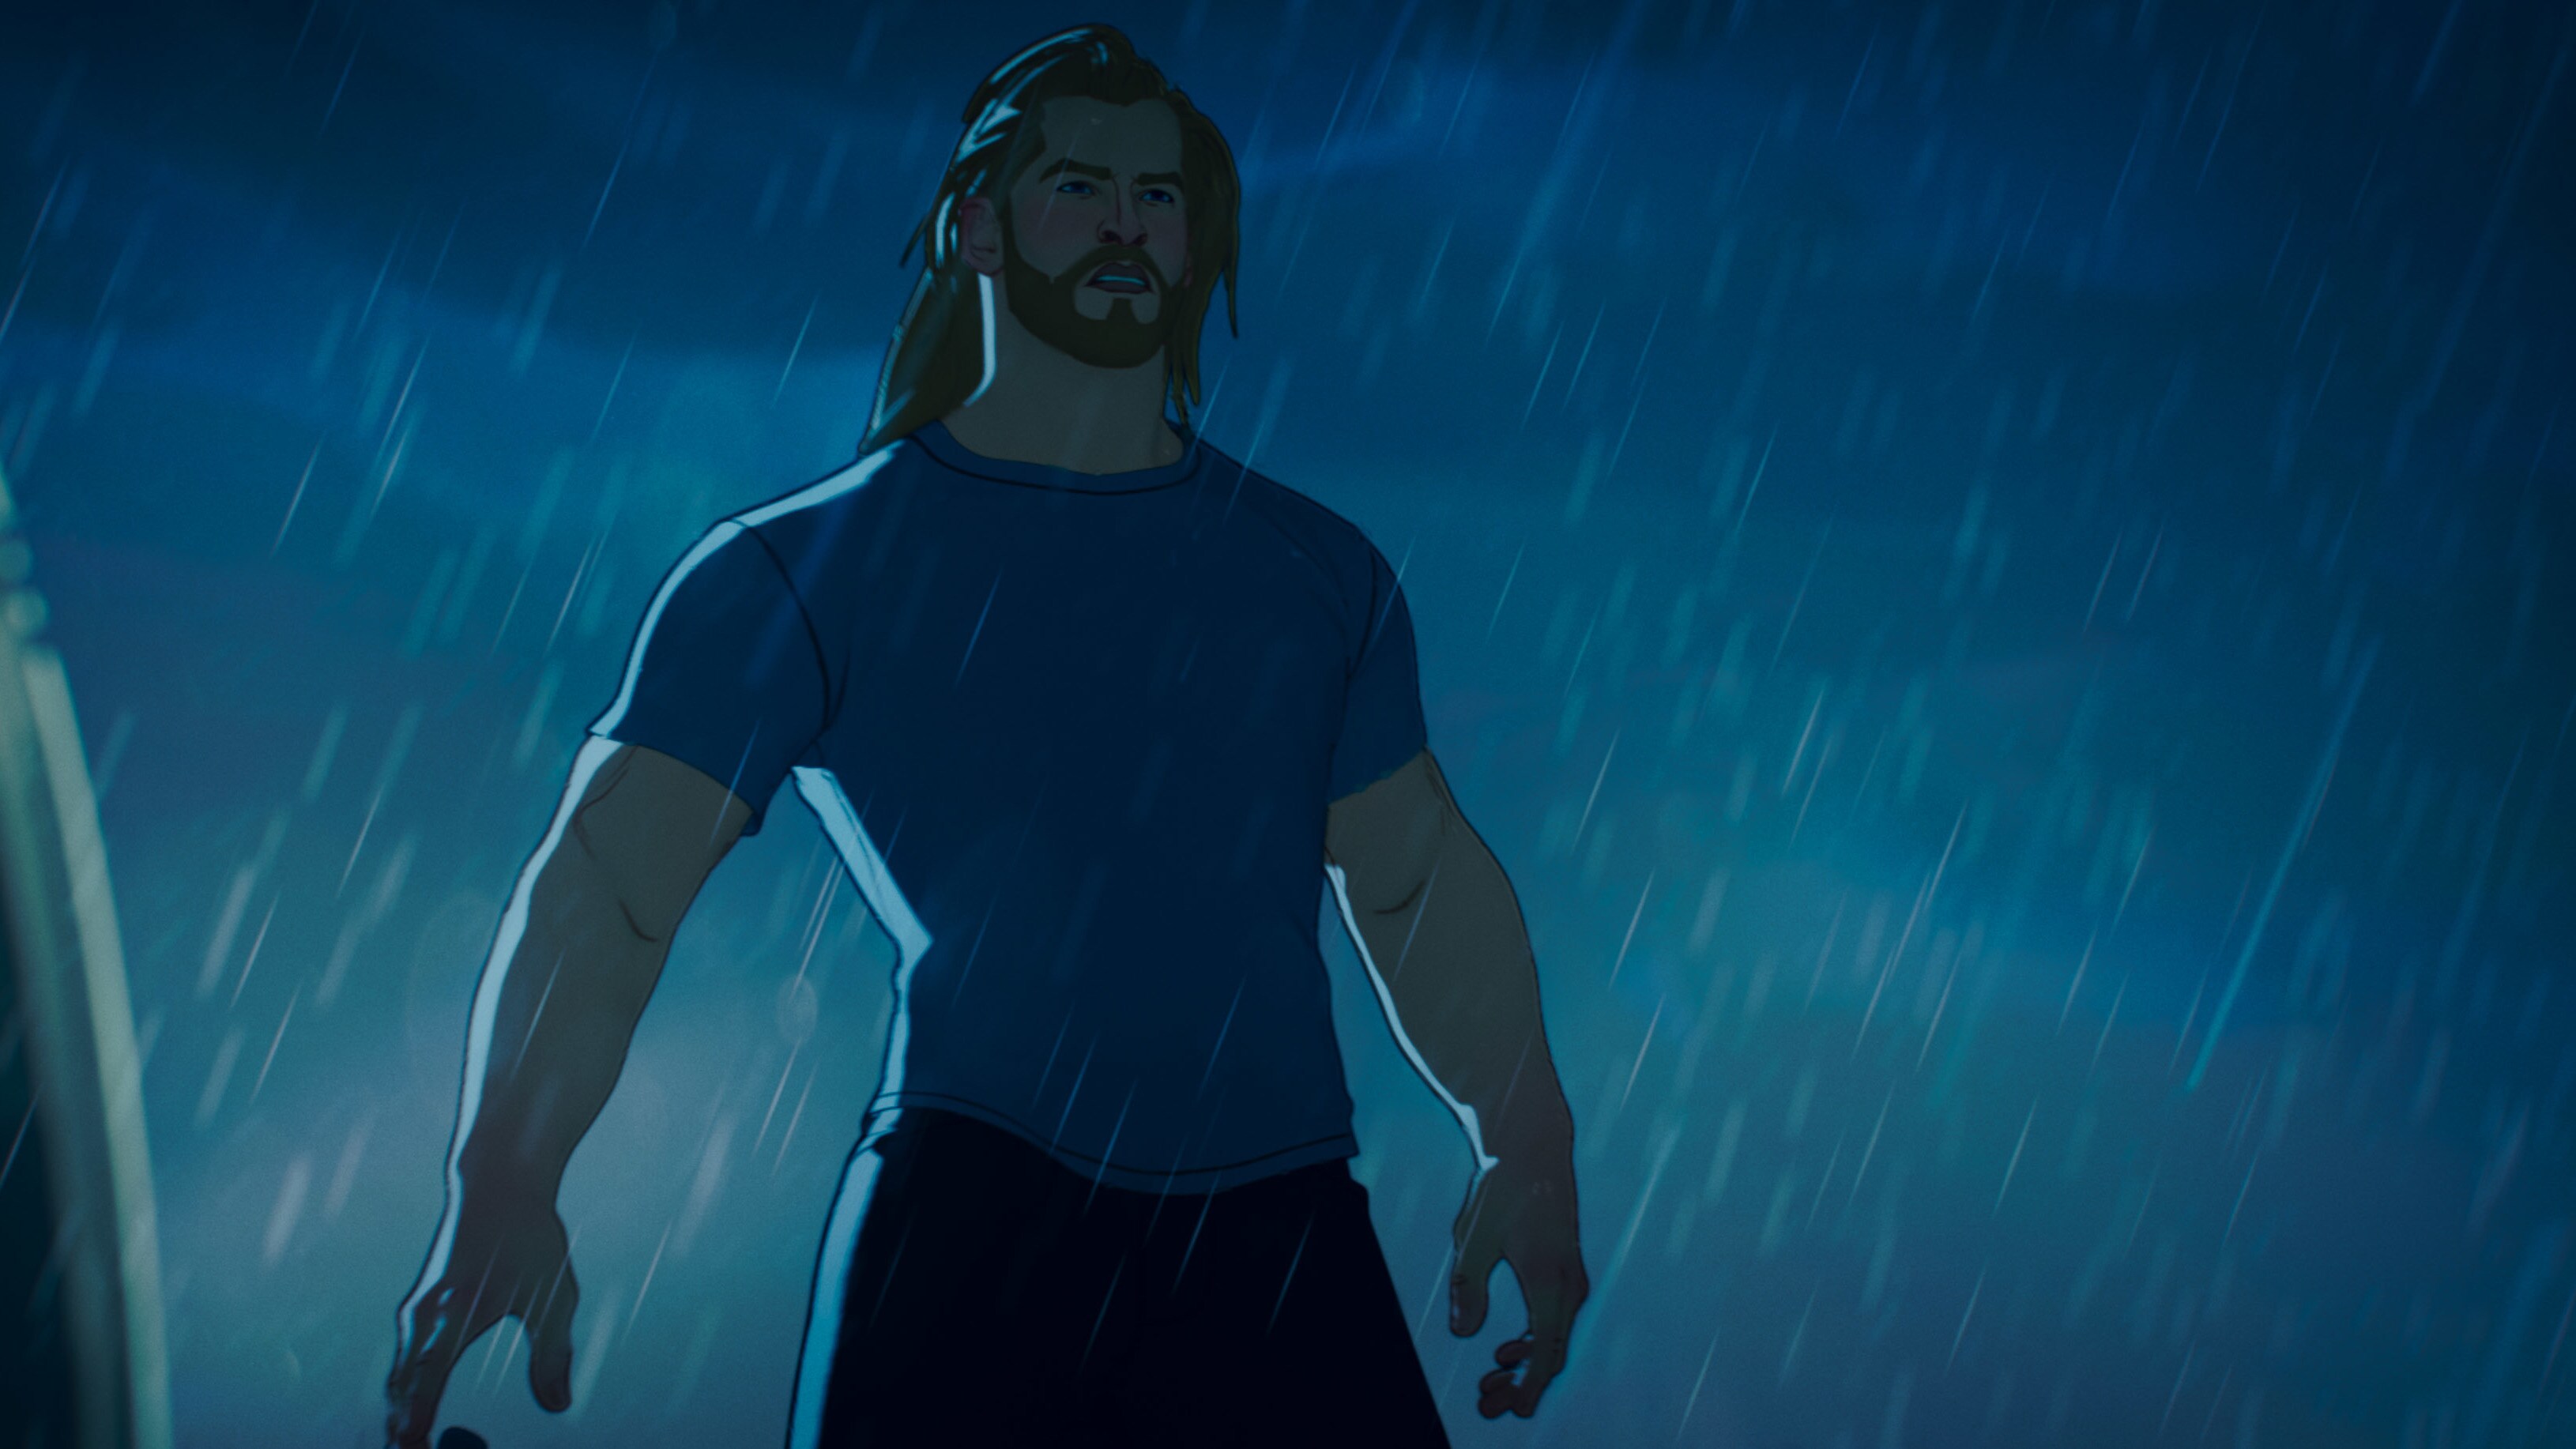 Thor in Marvel Studios' WHAT IF…? exclusively on Disney+. ©Marvel Studios 2021. All Rights Reserved.